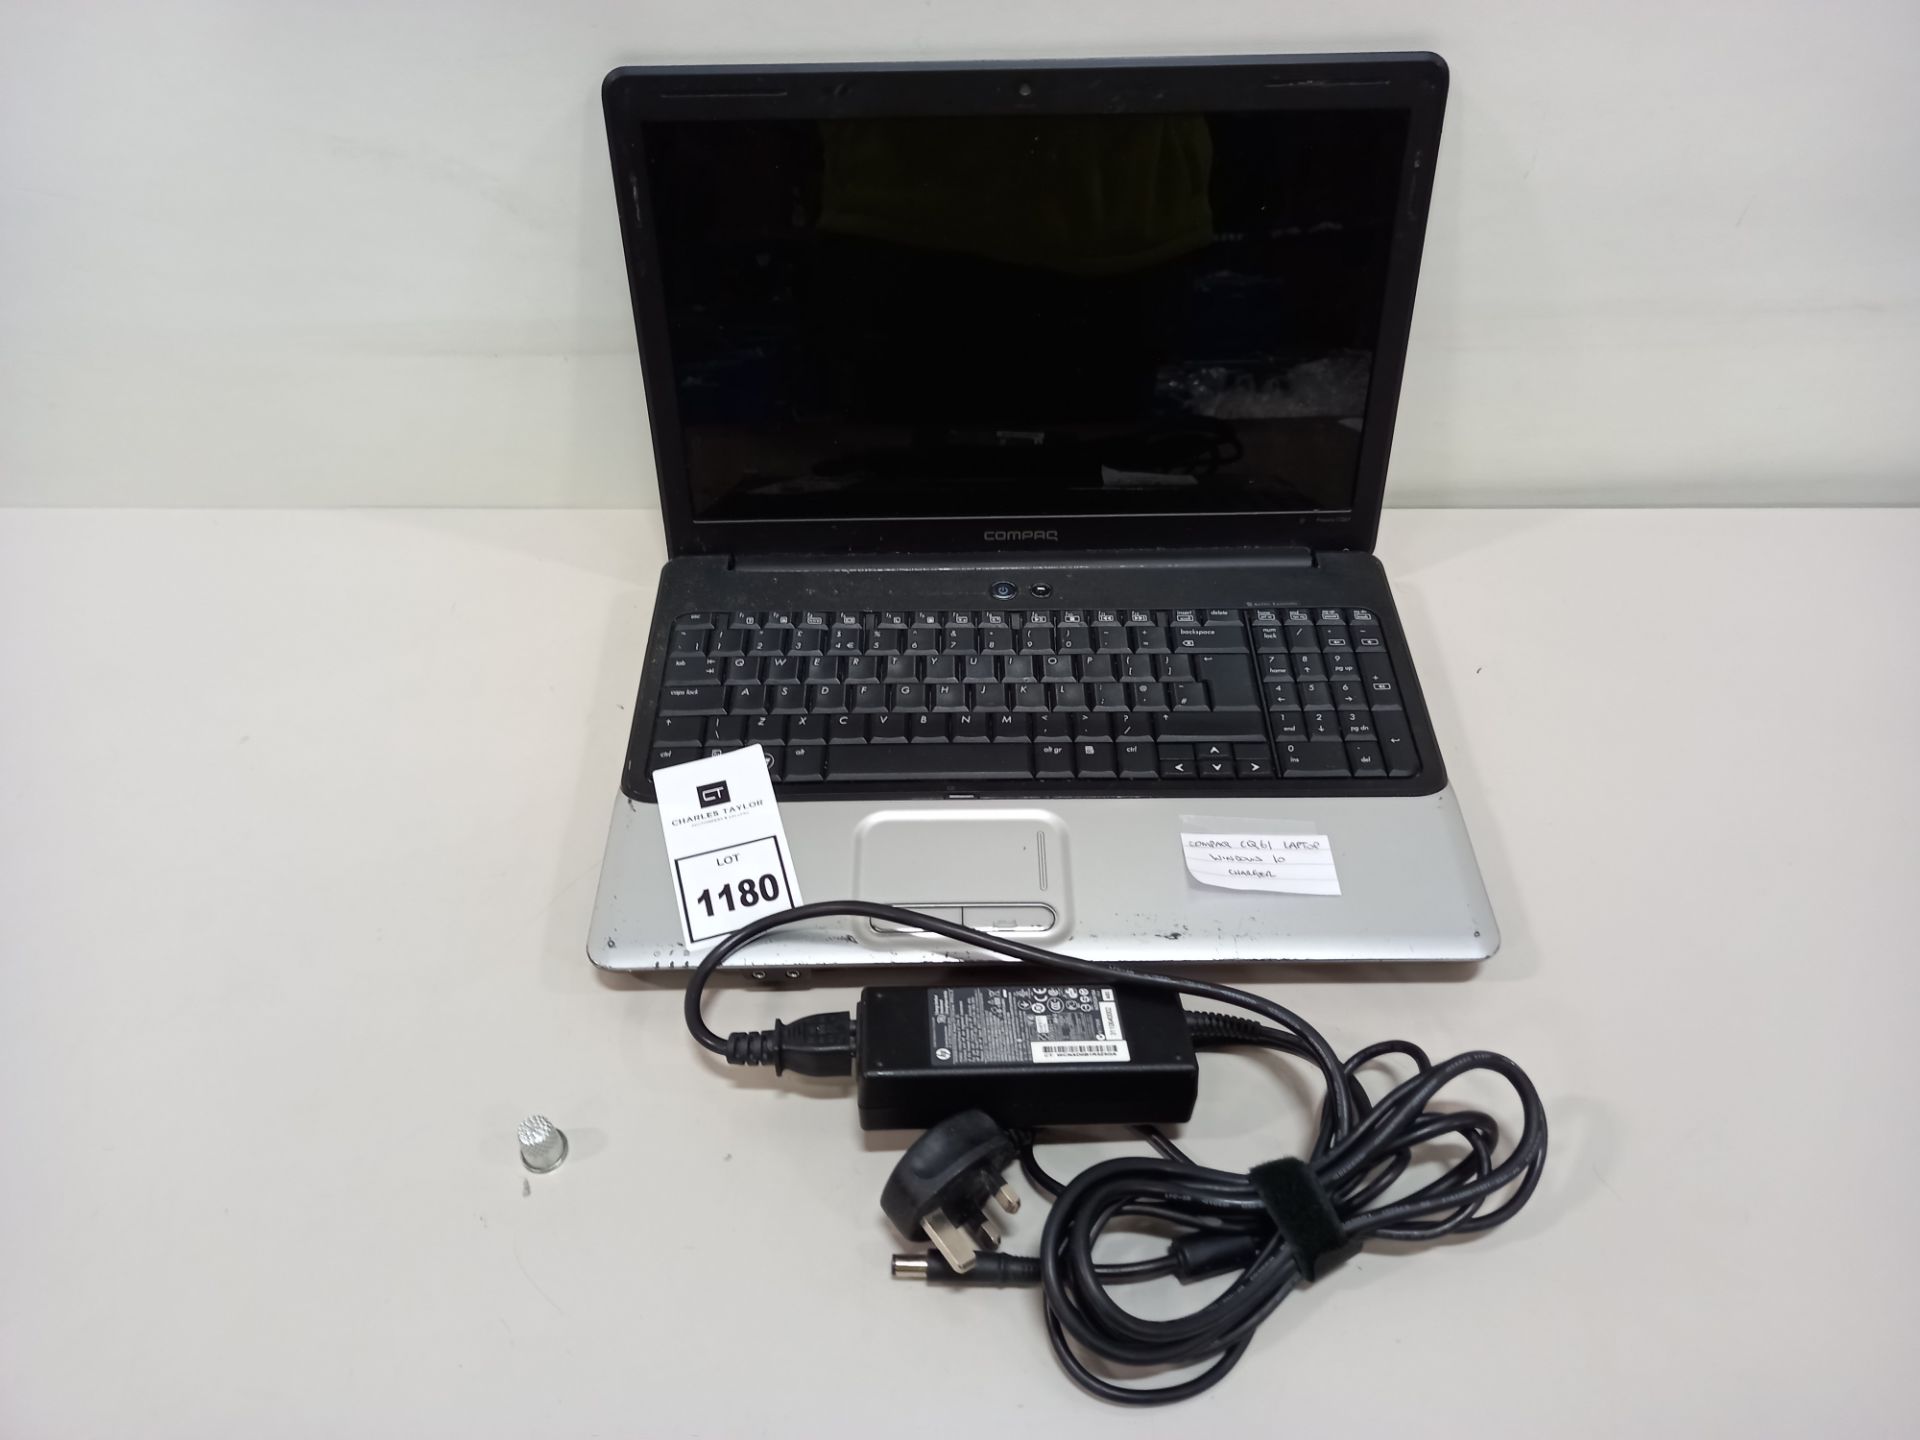 COMPAQ CQ61 LAPTOP WITH WINDOWS 10 AND CHARGER *NOTE: SCREEN JOINT TO LAPTOP DAMAGED*